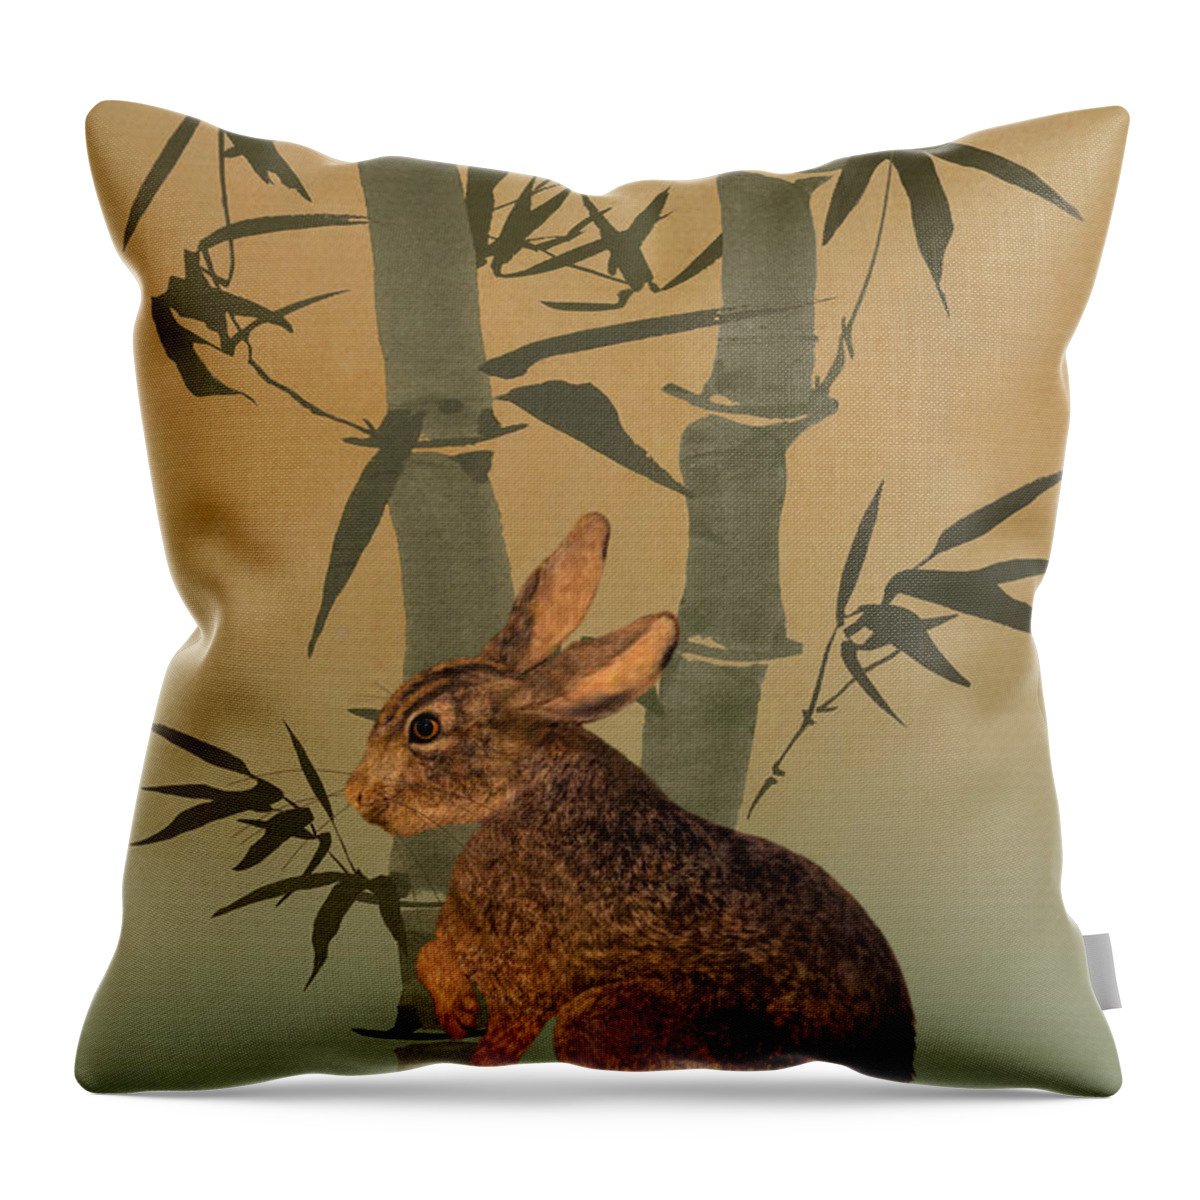 Hare Throw Pillow featuring the digital art Hare Under Bamboo Tree by M Spadecaller